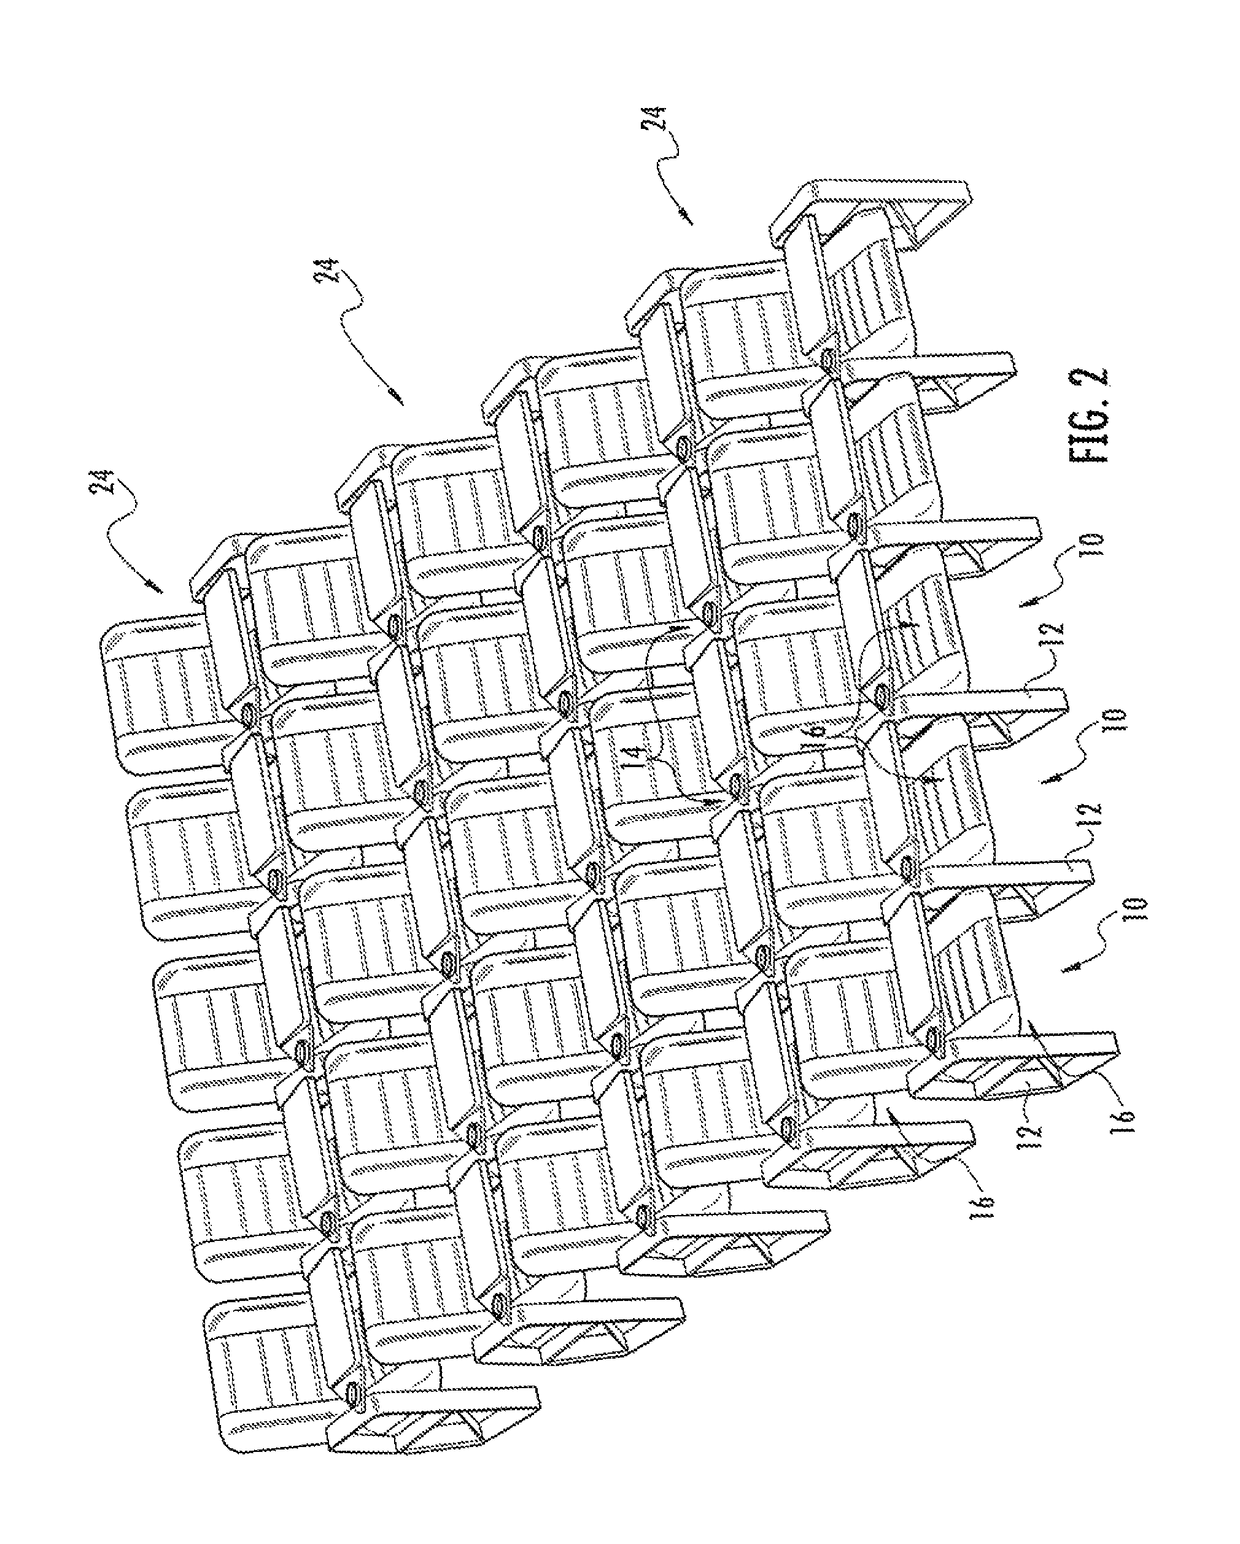 Portable, modular seating system and related methods